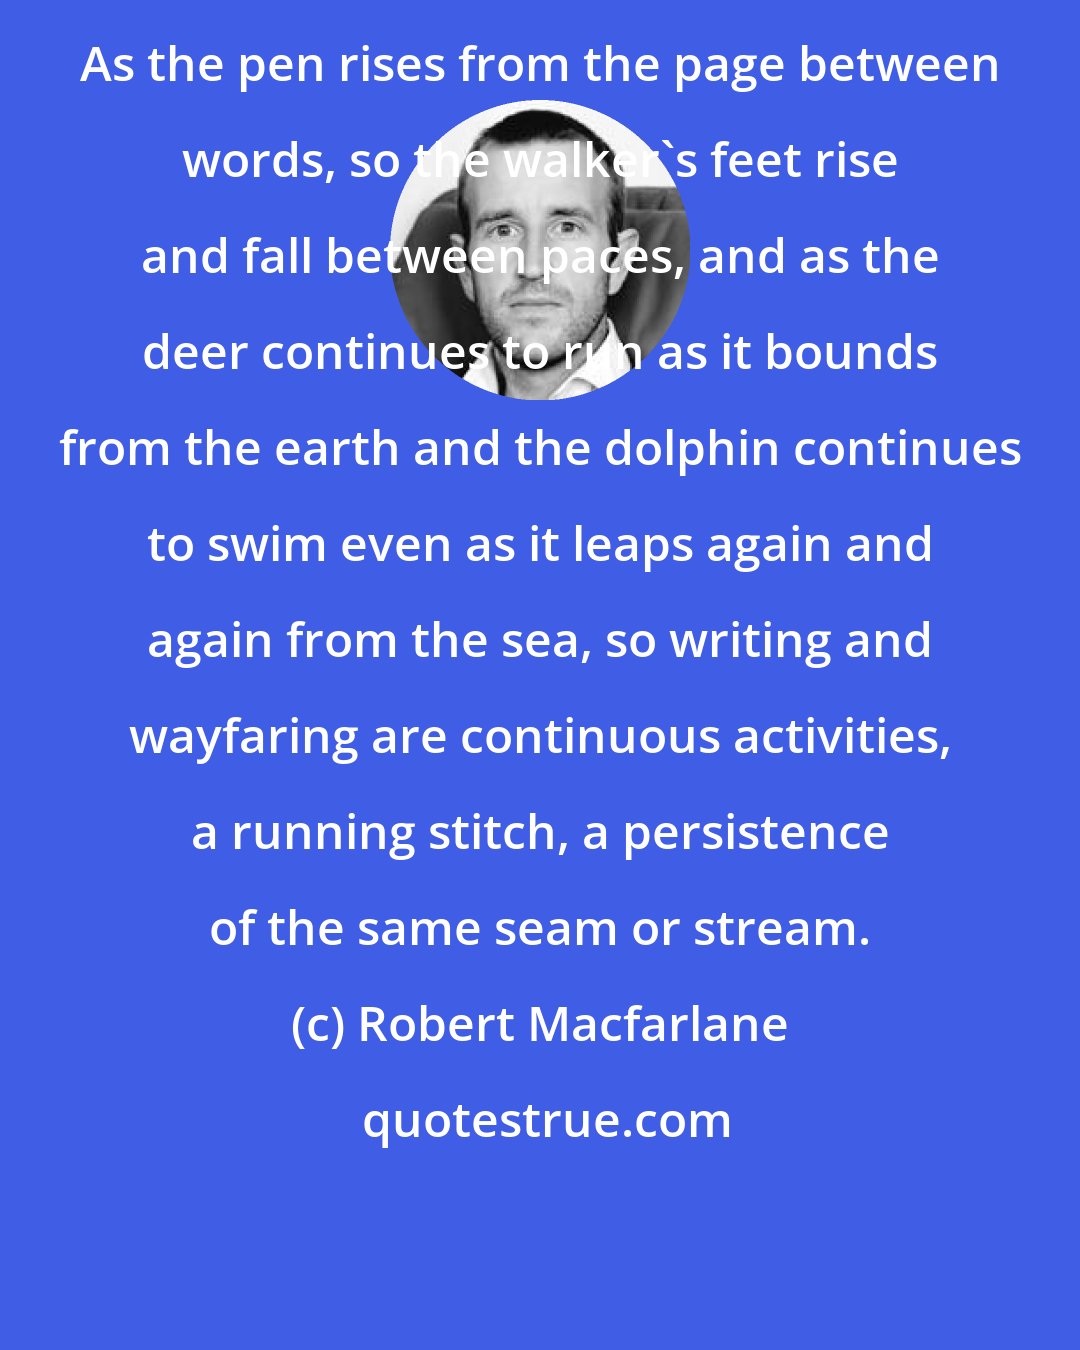 Robert Macfarlane: As the pen rises from the page between words, so the walker's feet rise and fall between paces, and as the deer continues to run as it bounds from the earth and the dolphin continues to swim even as it leaps again and again from the sea, so writing and wayfaring are continuous activities, a running stitch, a persistence of the same seam or stream.